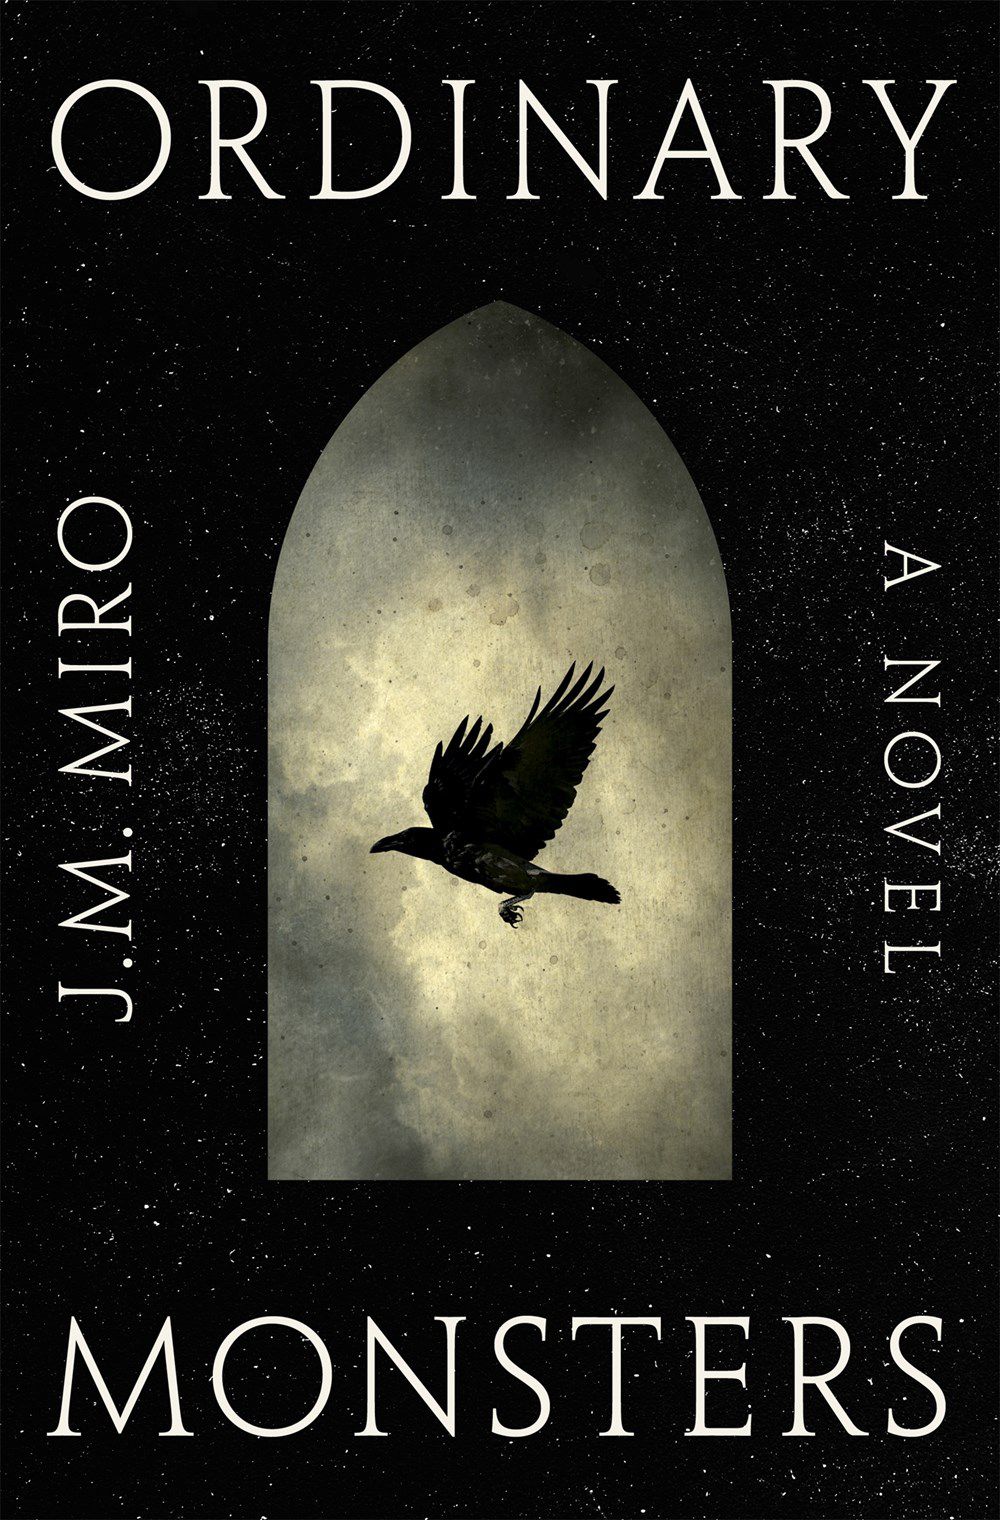 Cover image for Ordinary Monsters by J.M. Miro, featuring a black bird flying against a backdrop of both clouds and the night sky.